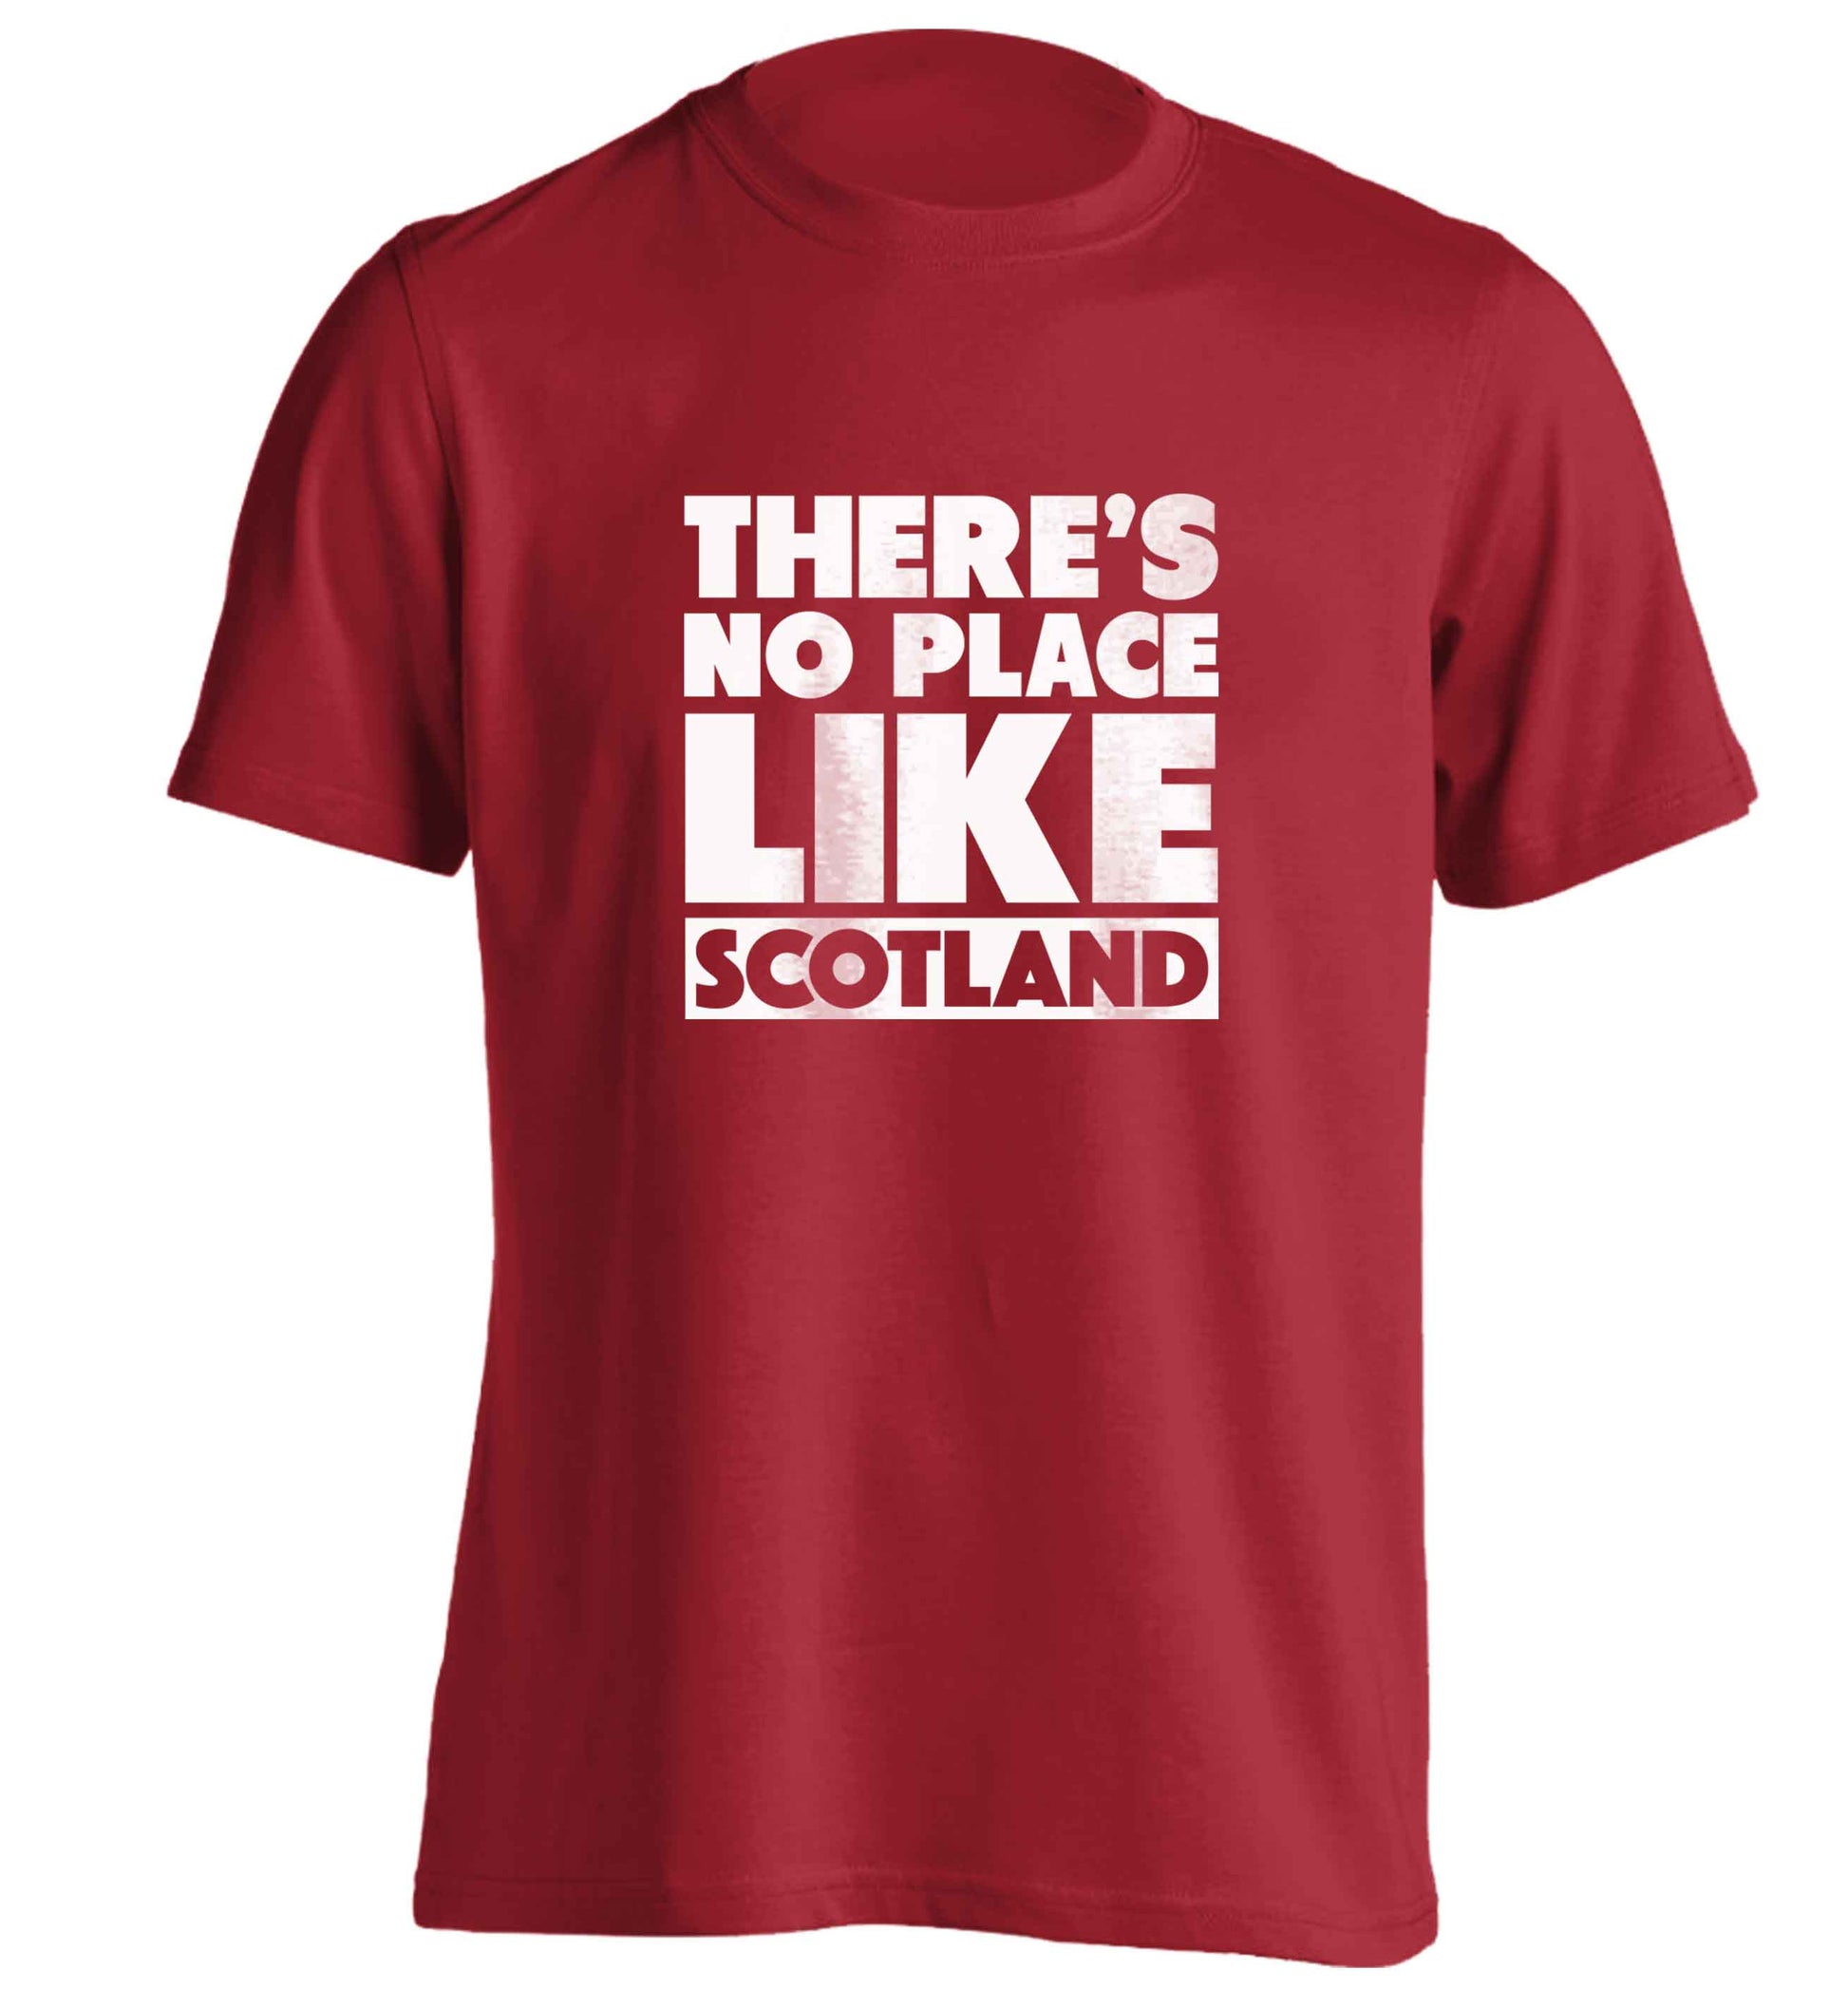 There's no place like Scotland adults unisex red Tshirt 2XL